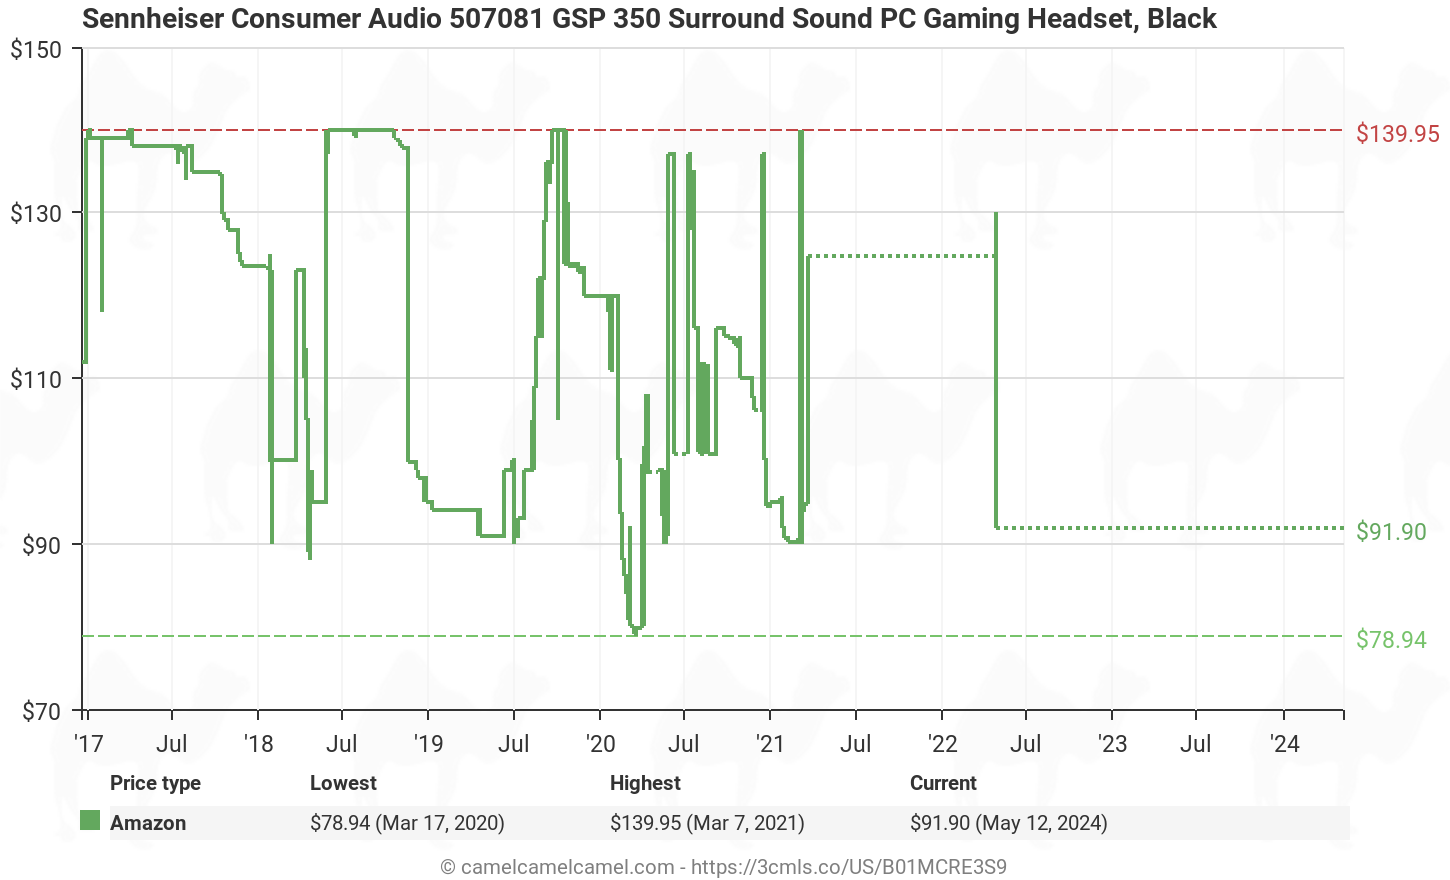 Amazon price history chart for Sennheiser 507081 GSP 350 Surround Sound PC Gaming Headset (B01MCRE3S9)